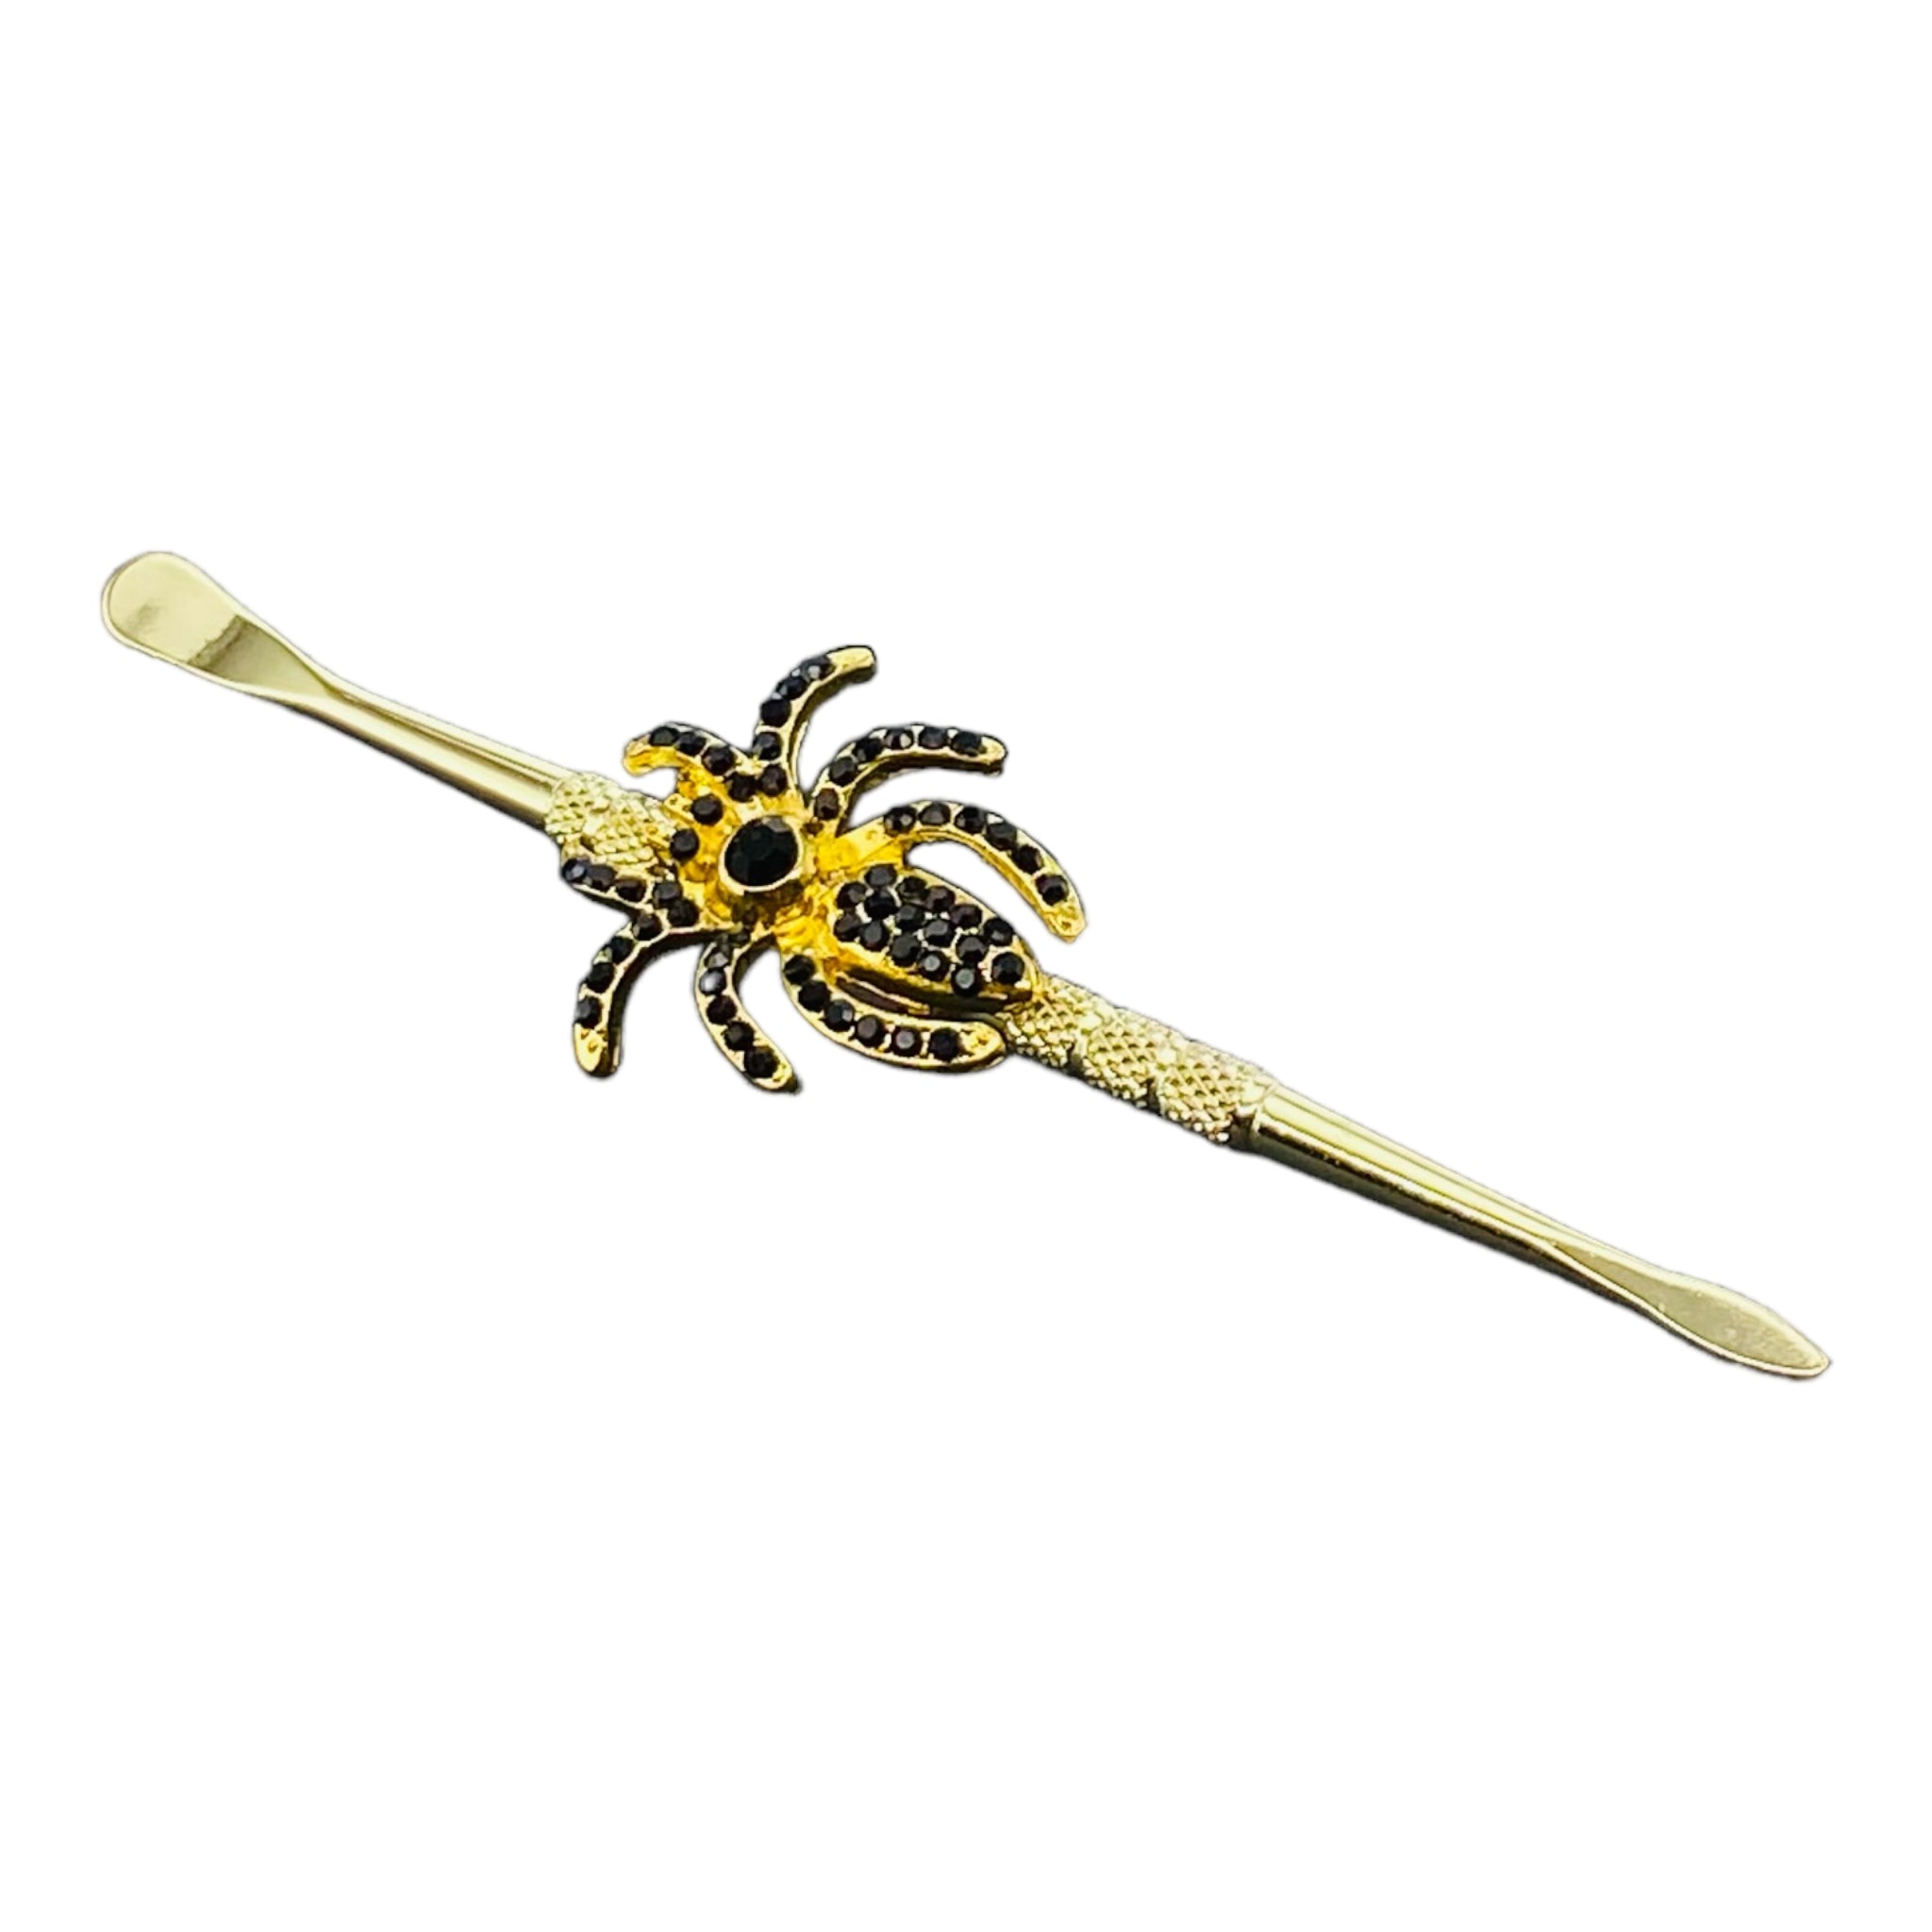 Bedazzled Spider Gold Paddle Scoop And Spear Point Dab Tool